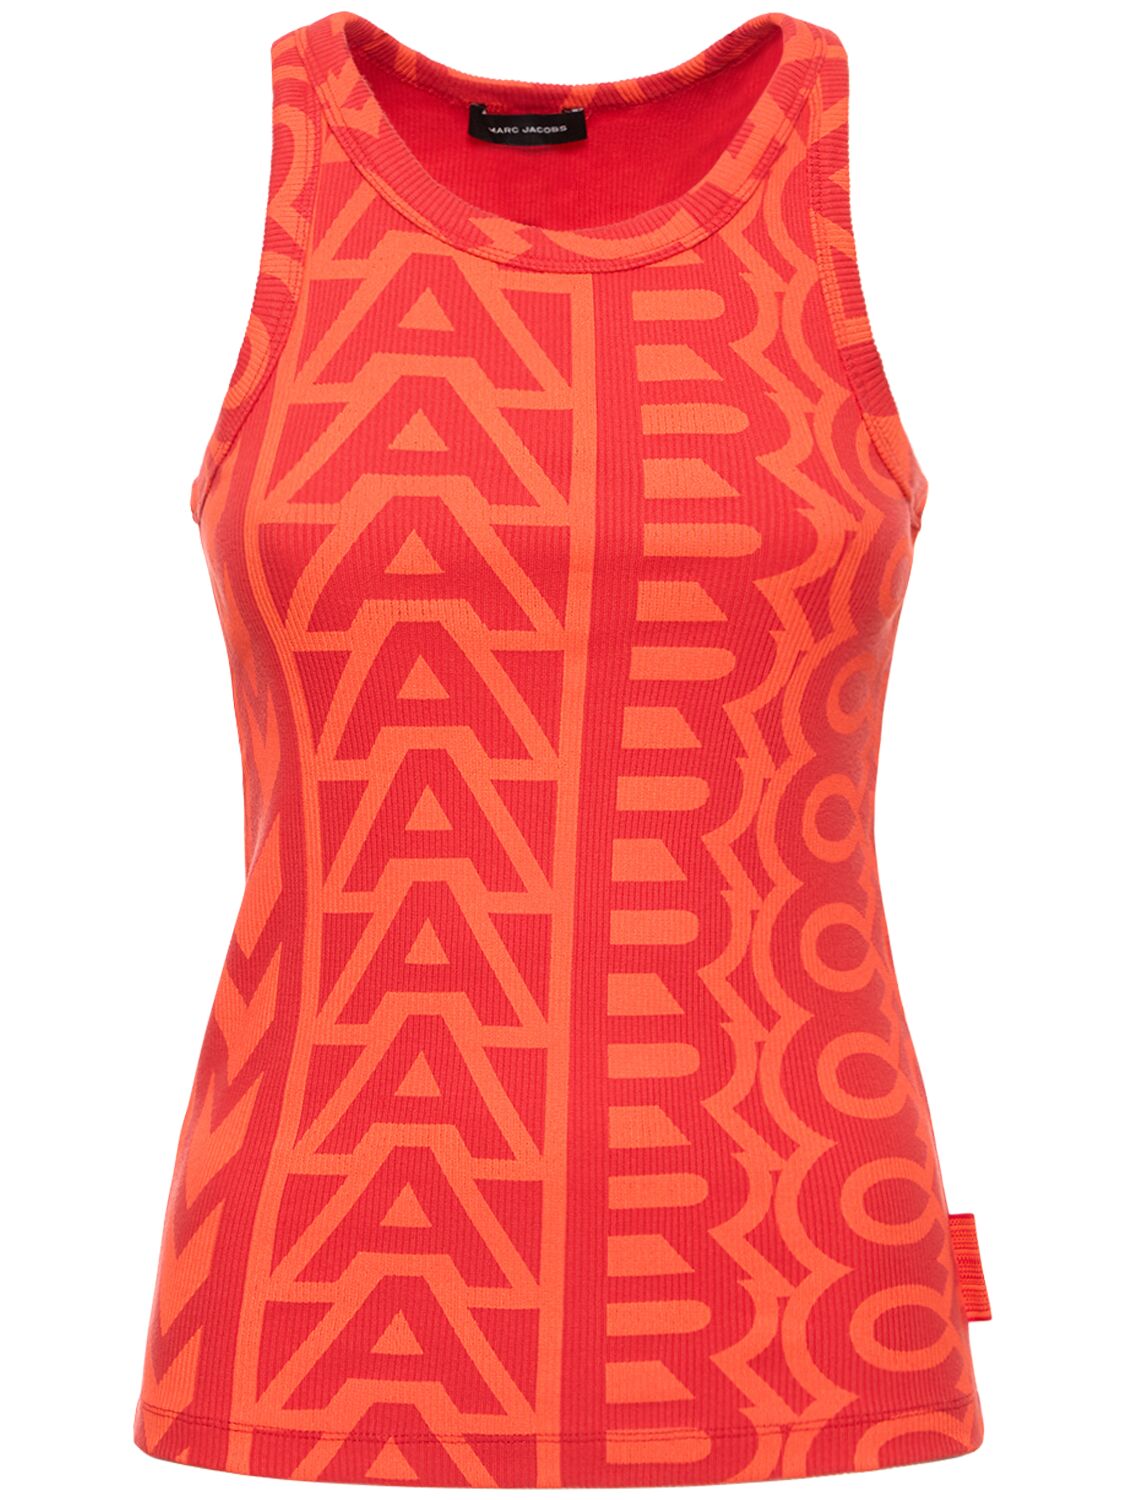 MARC JACOBS THE MONOGRAM RIBBED TANK TOP